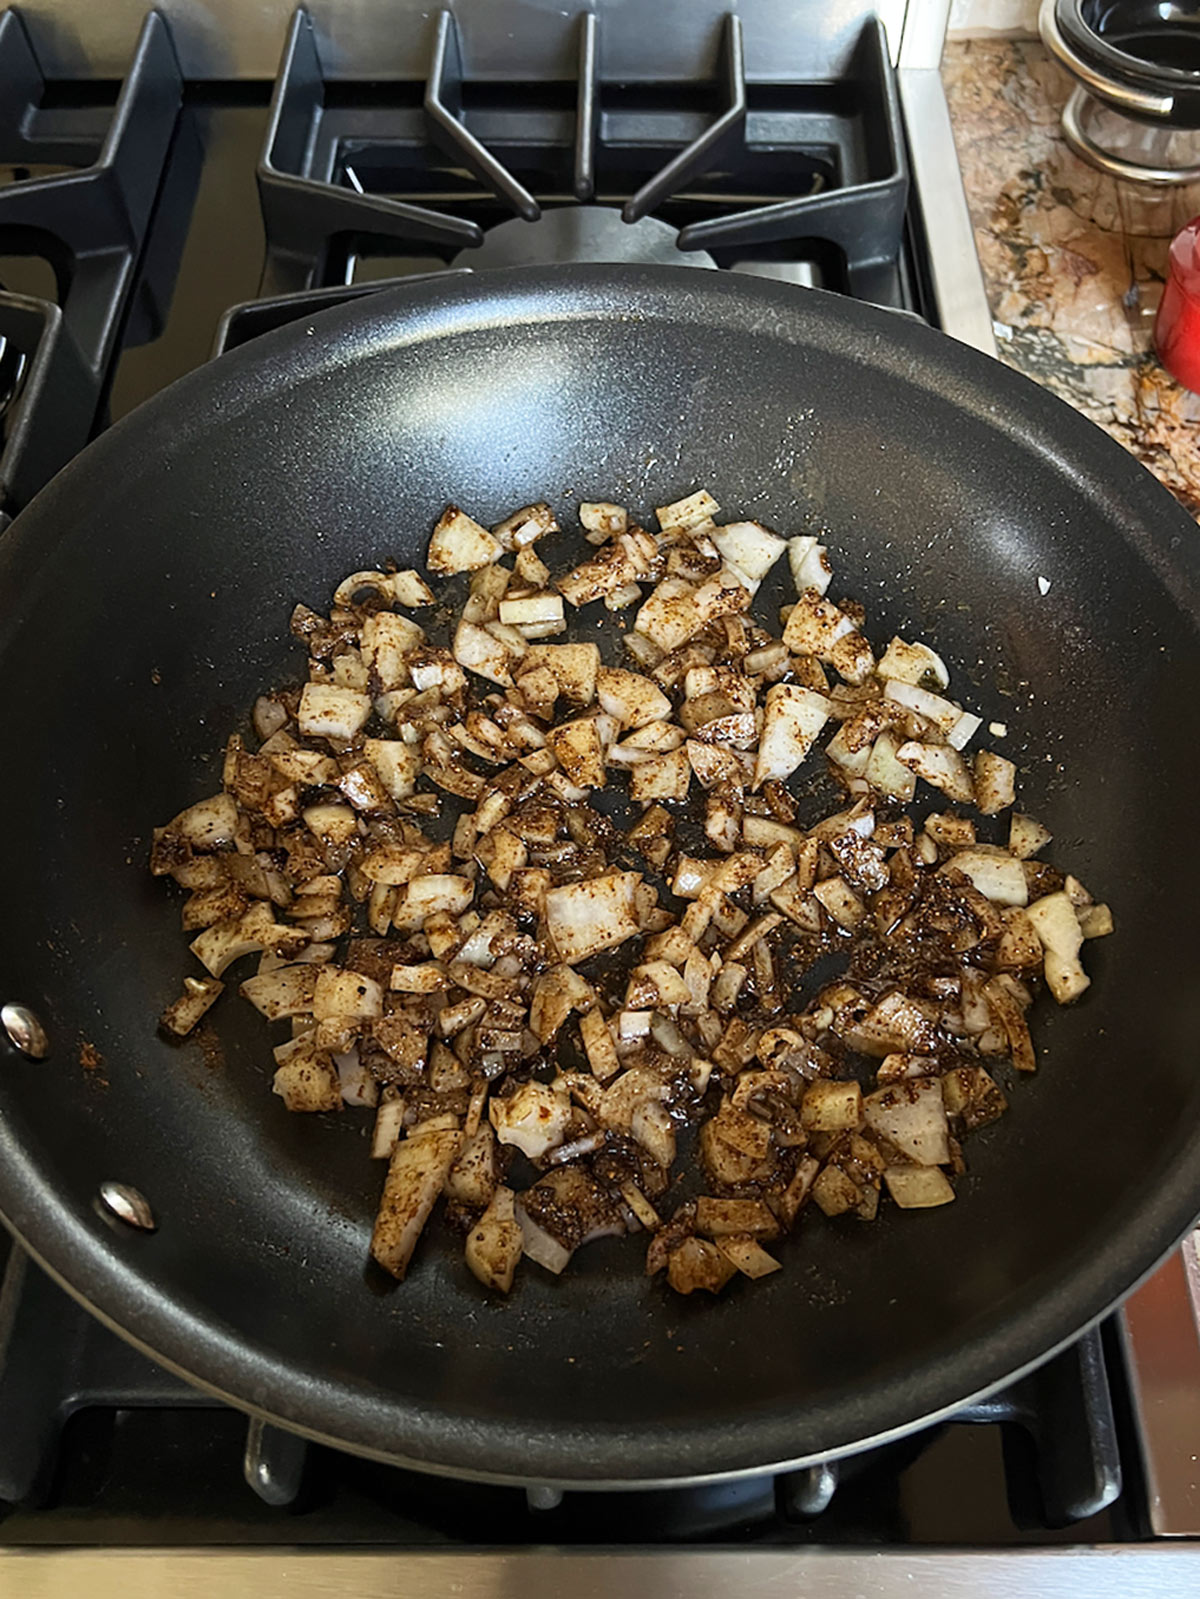 Onions and spices mixed together in the fry pan.